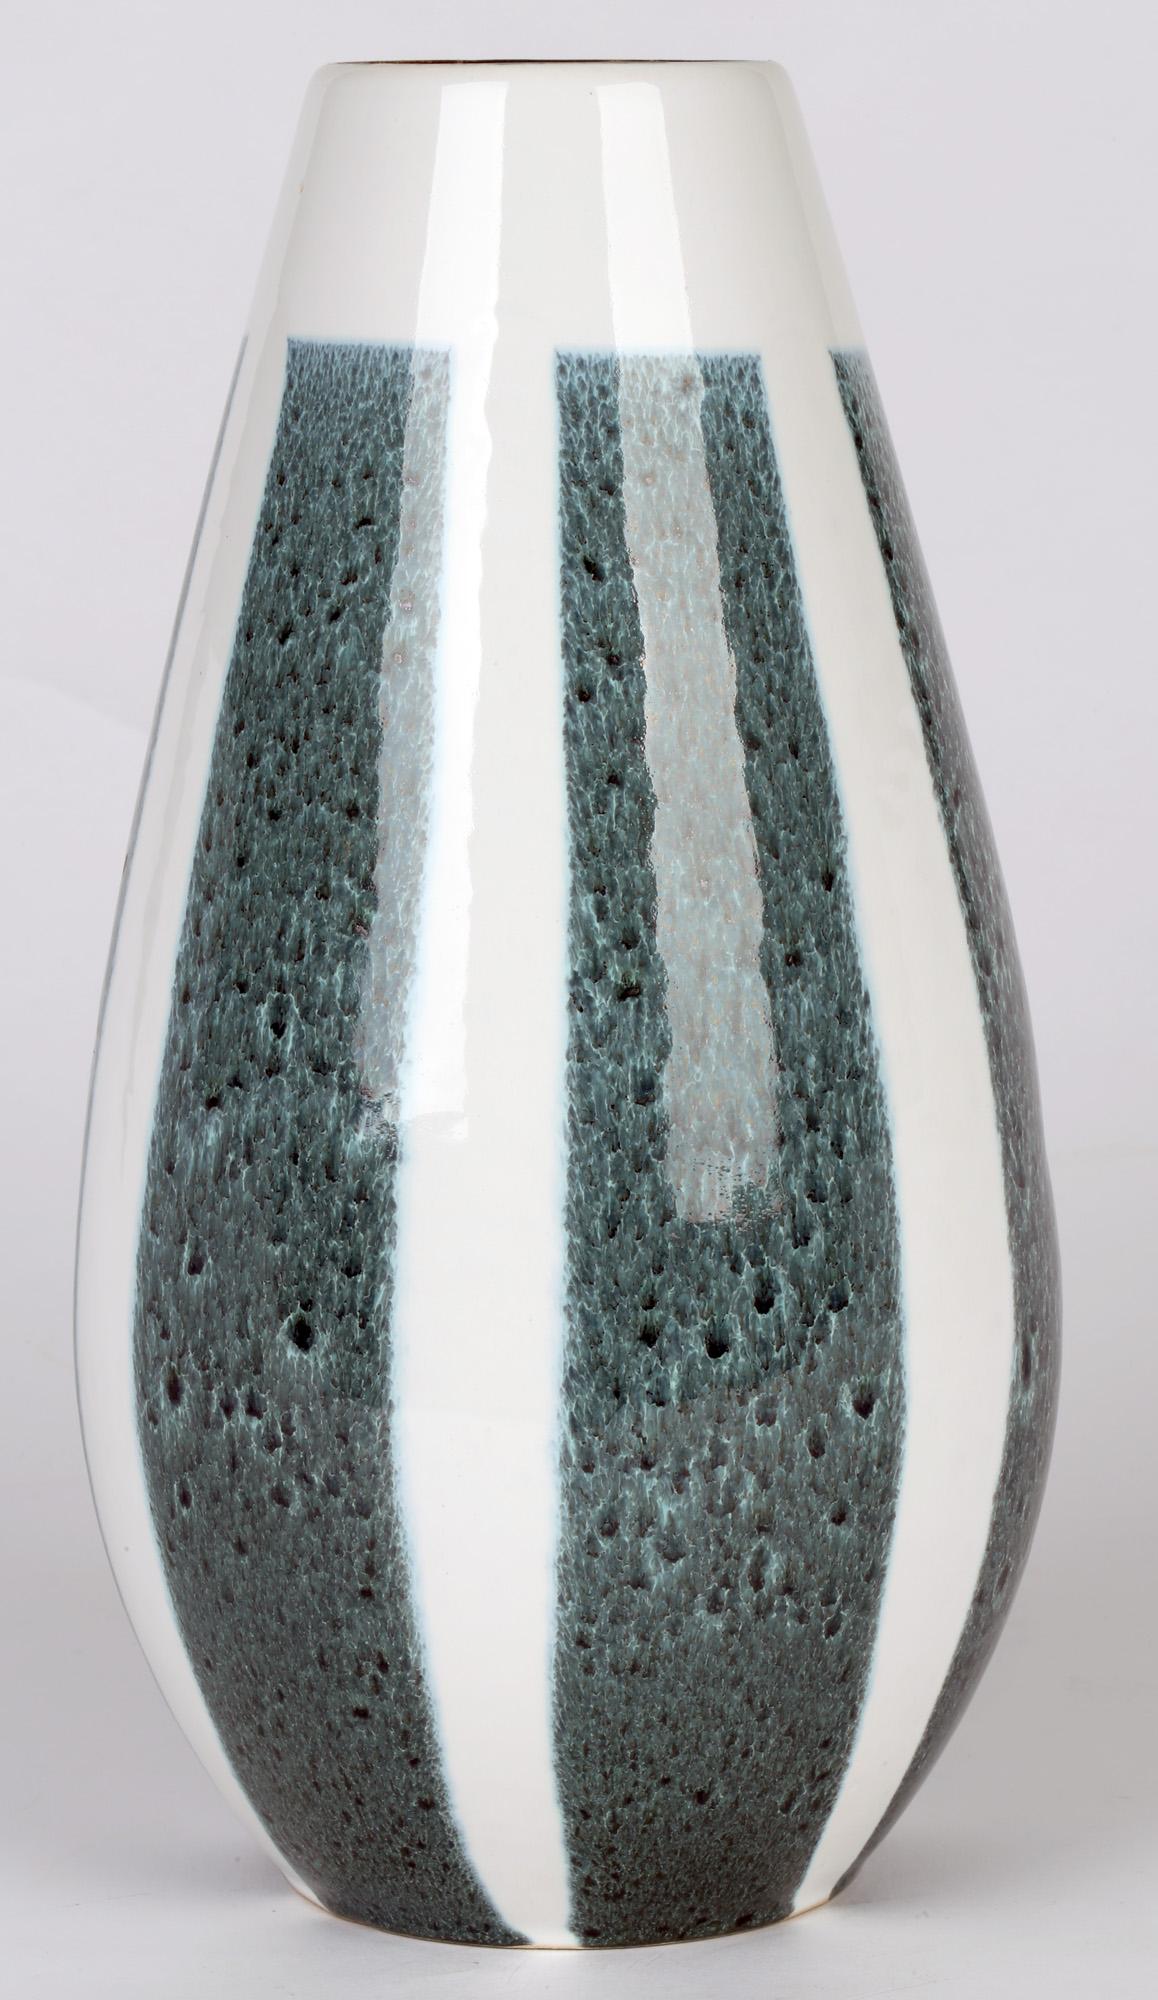 A very stylish West German ceramic vase decorated with mottled blue panels on a white ground dating from around 1960. The vase is of tall simple elegant tear drop shape and is decorated in bright white glazes with six long rectangular panels